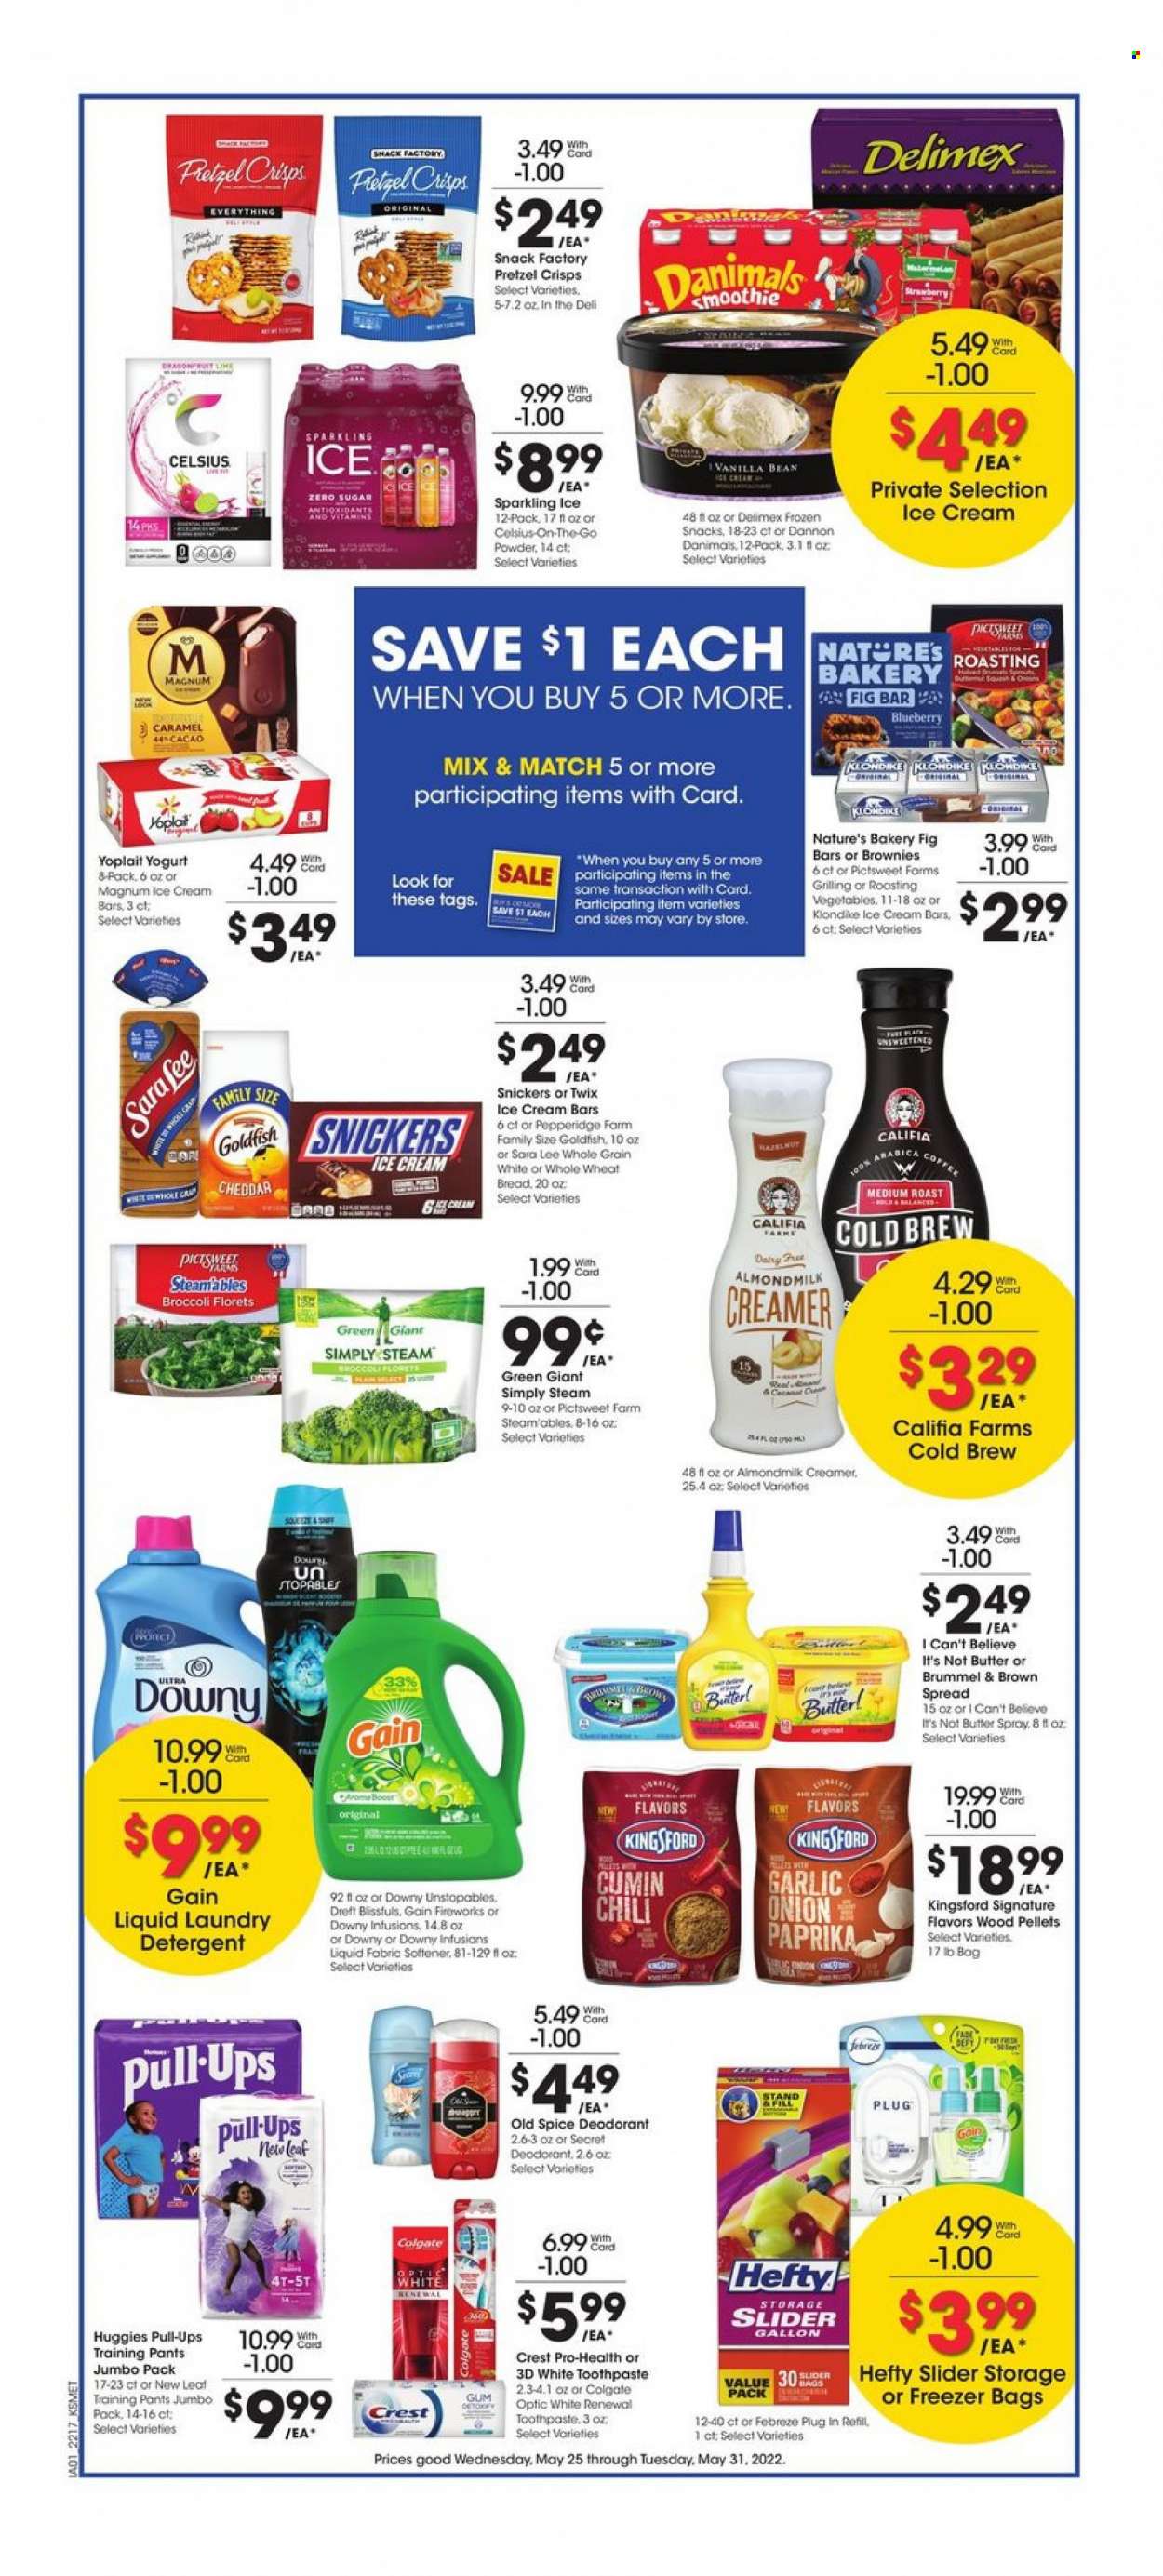 thumbnail - City Market Flyer - 05/25/2022 - 05/31/2022 - Sales products - wheat bread, Sara Lee, brownies, broccoli, garlic, onion, cheese, yoghurt, Yoplait, Dannon, Danimals, almond milk, butter, I Can't Believe It's Not Butter, creamer, Magnum, ice cream, ice cream bars, snack, Snickers, Twix, Goldfish, pretzel crisps, spice, cumin, coffee, Huggies, pants, baby pants, detergent, Febreze, Gain, Unstopables, fabric softener, laundry detergent, Gain Fireworks, Downy Laundry, Old Spice, Colgate, toothpaste, Crest, anti-perspirant, deodorant, Hefty, gallon, freezer bag, melons. Page 4.